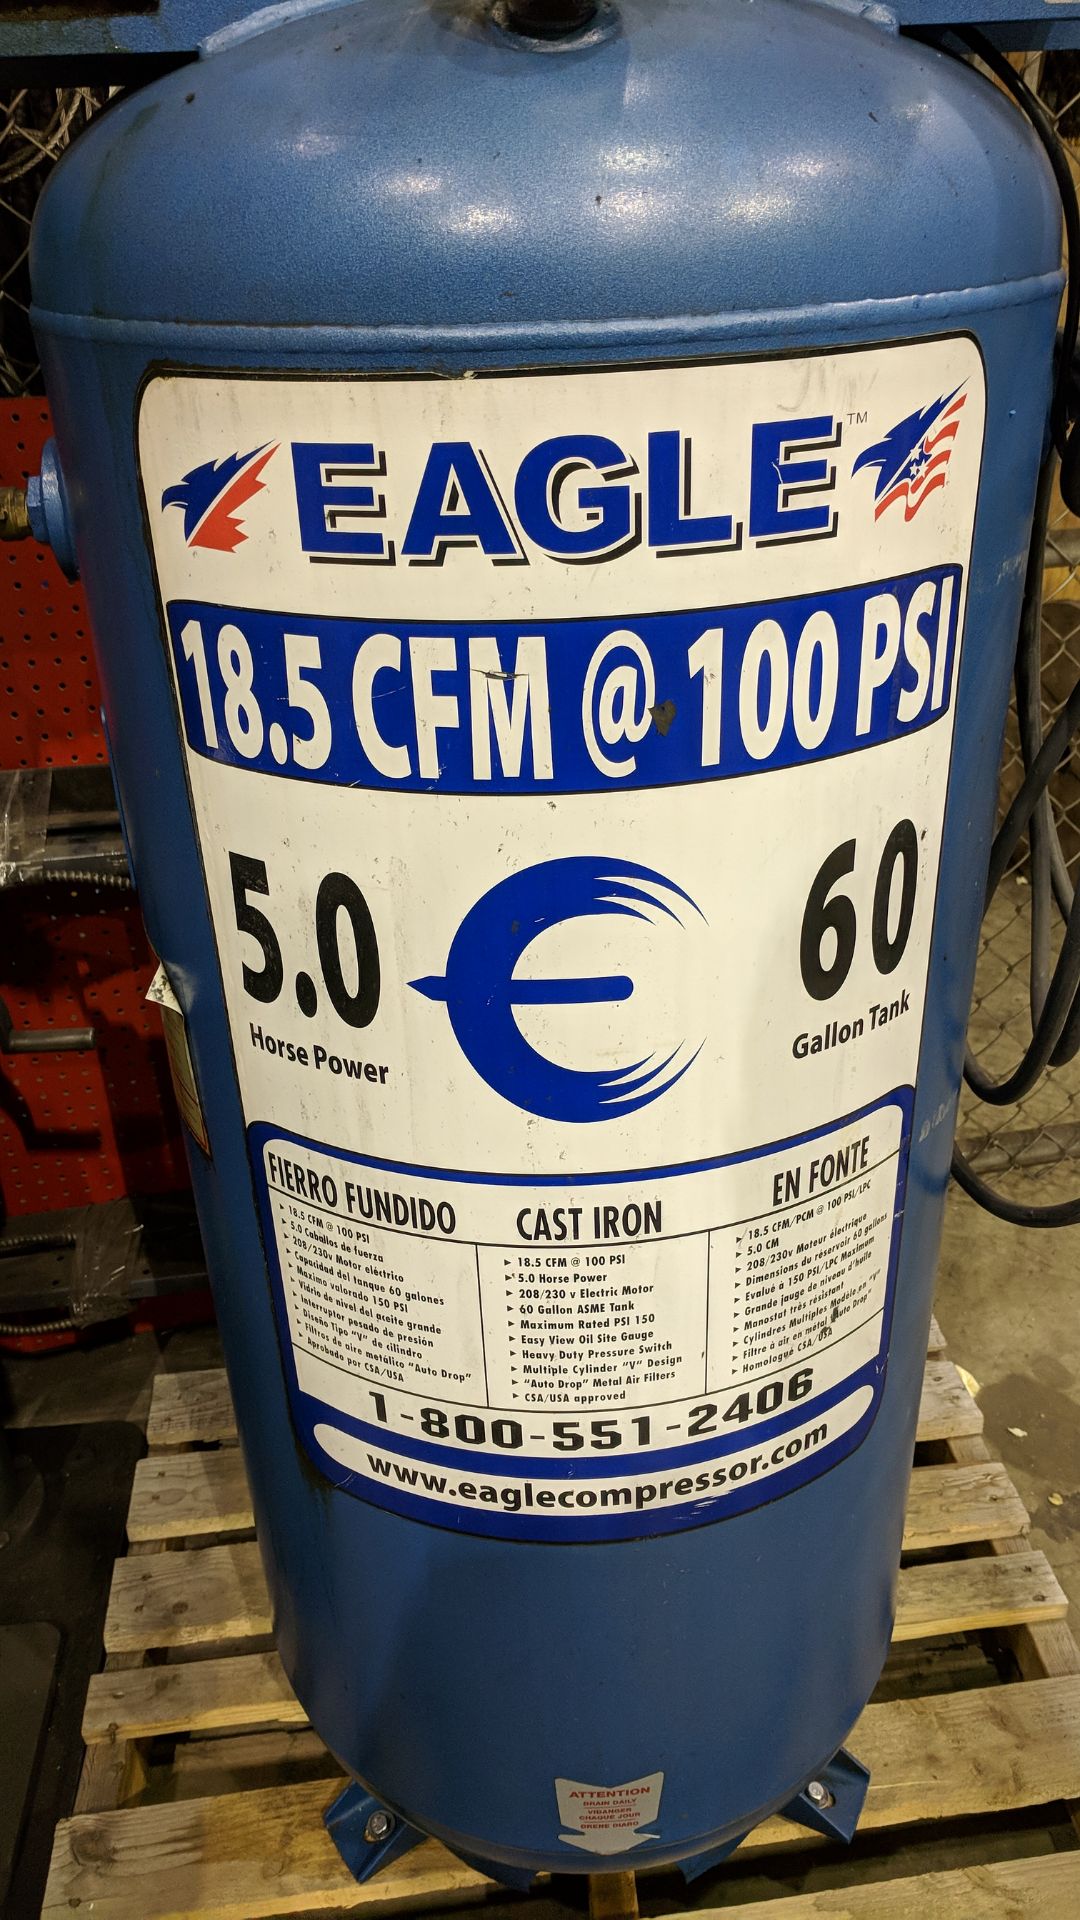 EAGLE C5160V1 PISTON TYPE TANK MOUNTED AIR COMPRESSOR WITH 5HP, 60 GAL, 18.5 CFM @ 100 PSI CAPACITY, - Image 2 of 4